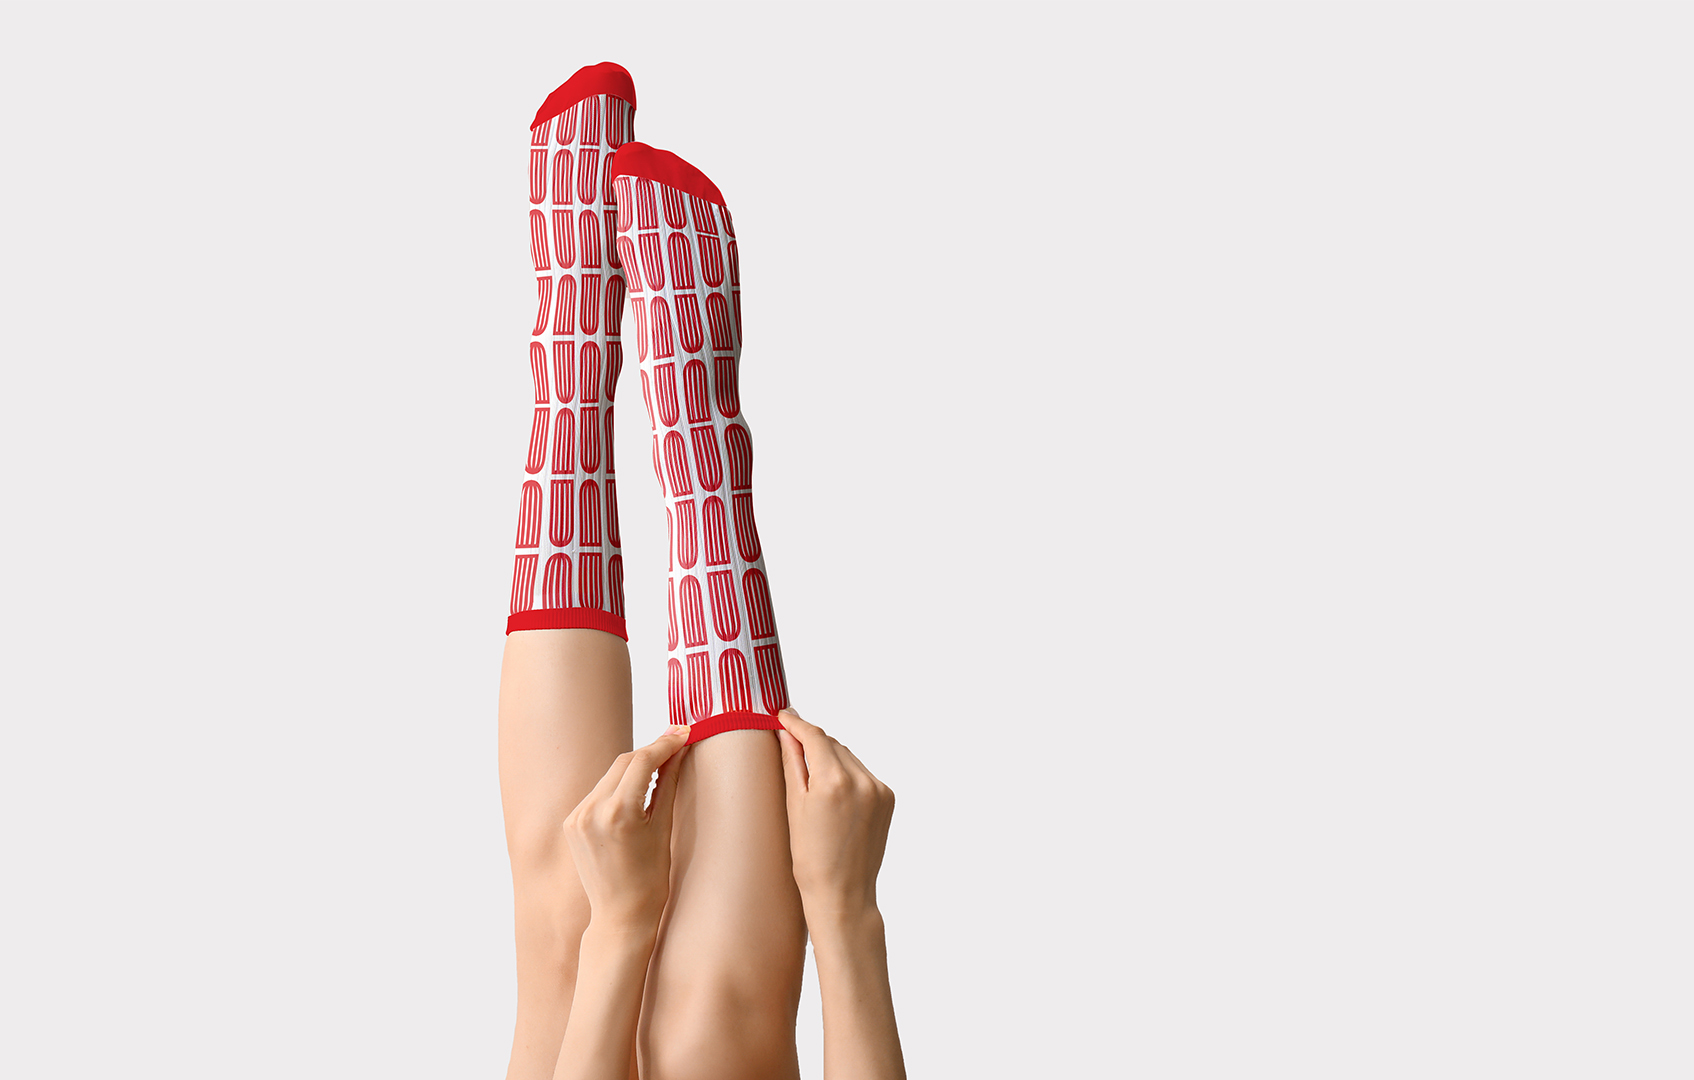 Period Pattern Socks. One suggested proposal for the application of the patterns, used to help generate manifesto advocacy and raise funds to fight period poverty.